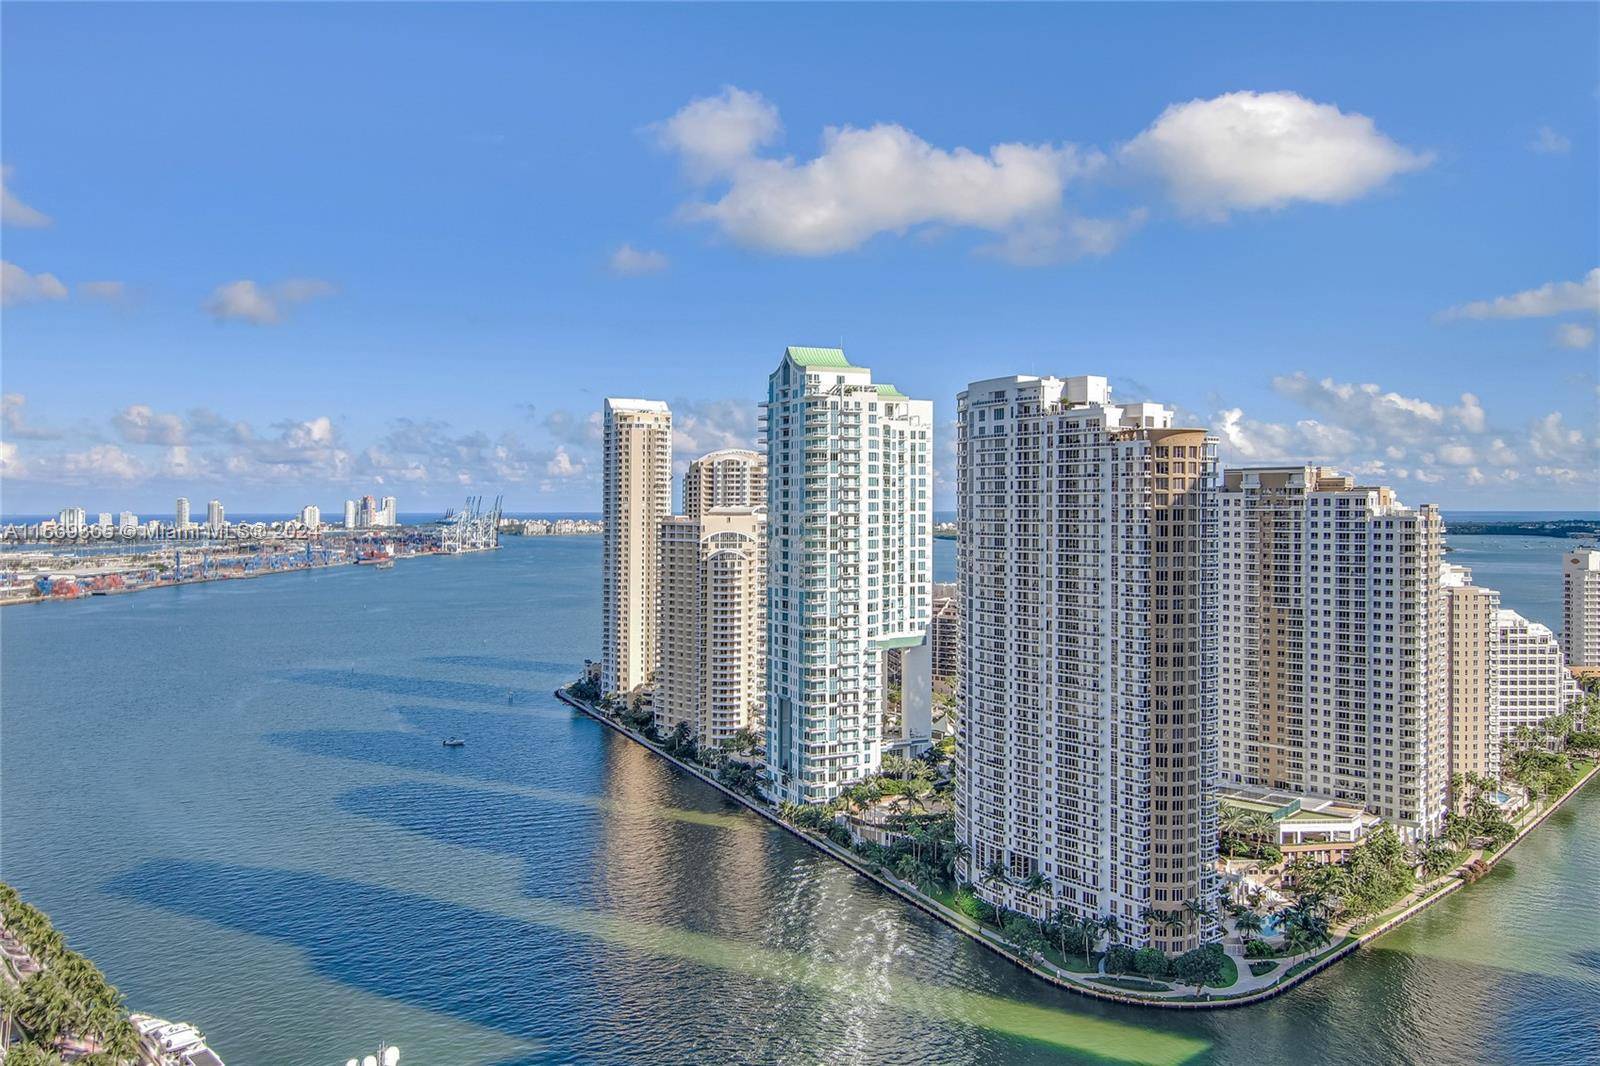 One of the best condo buildings on Brickell Key with water and city views.